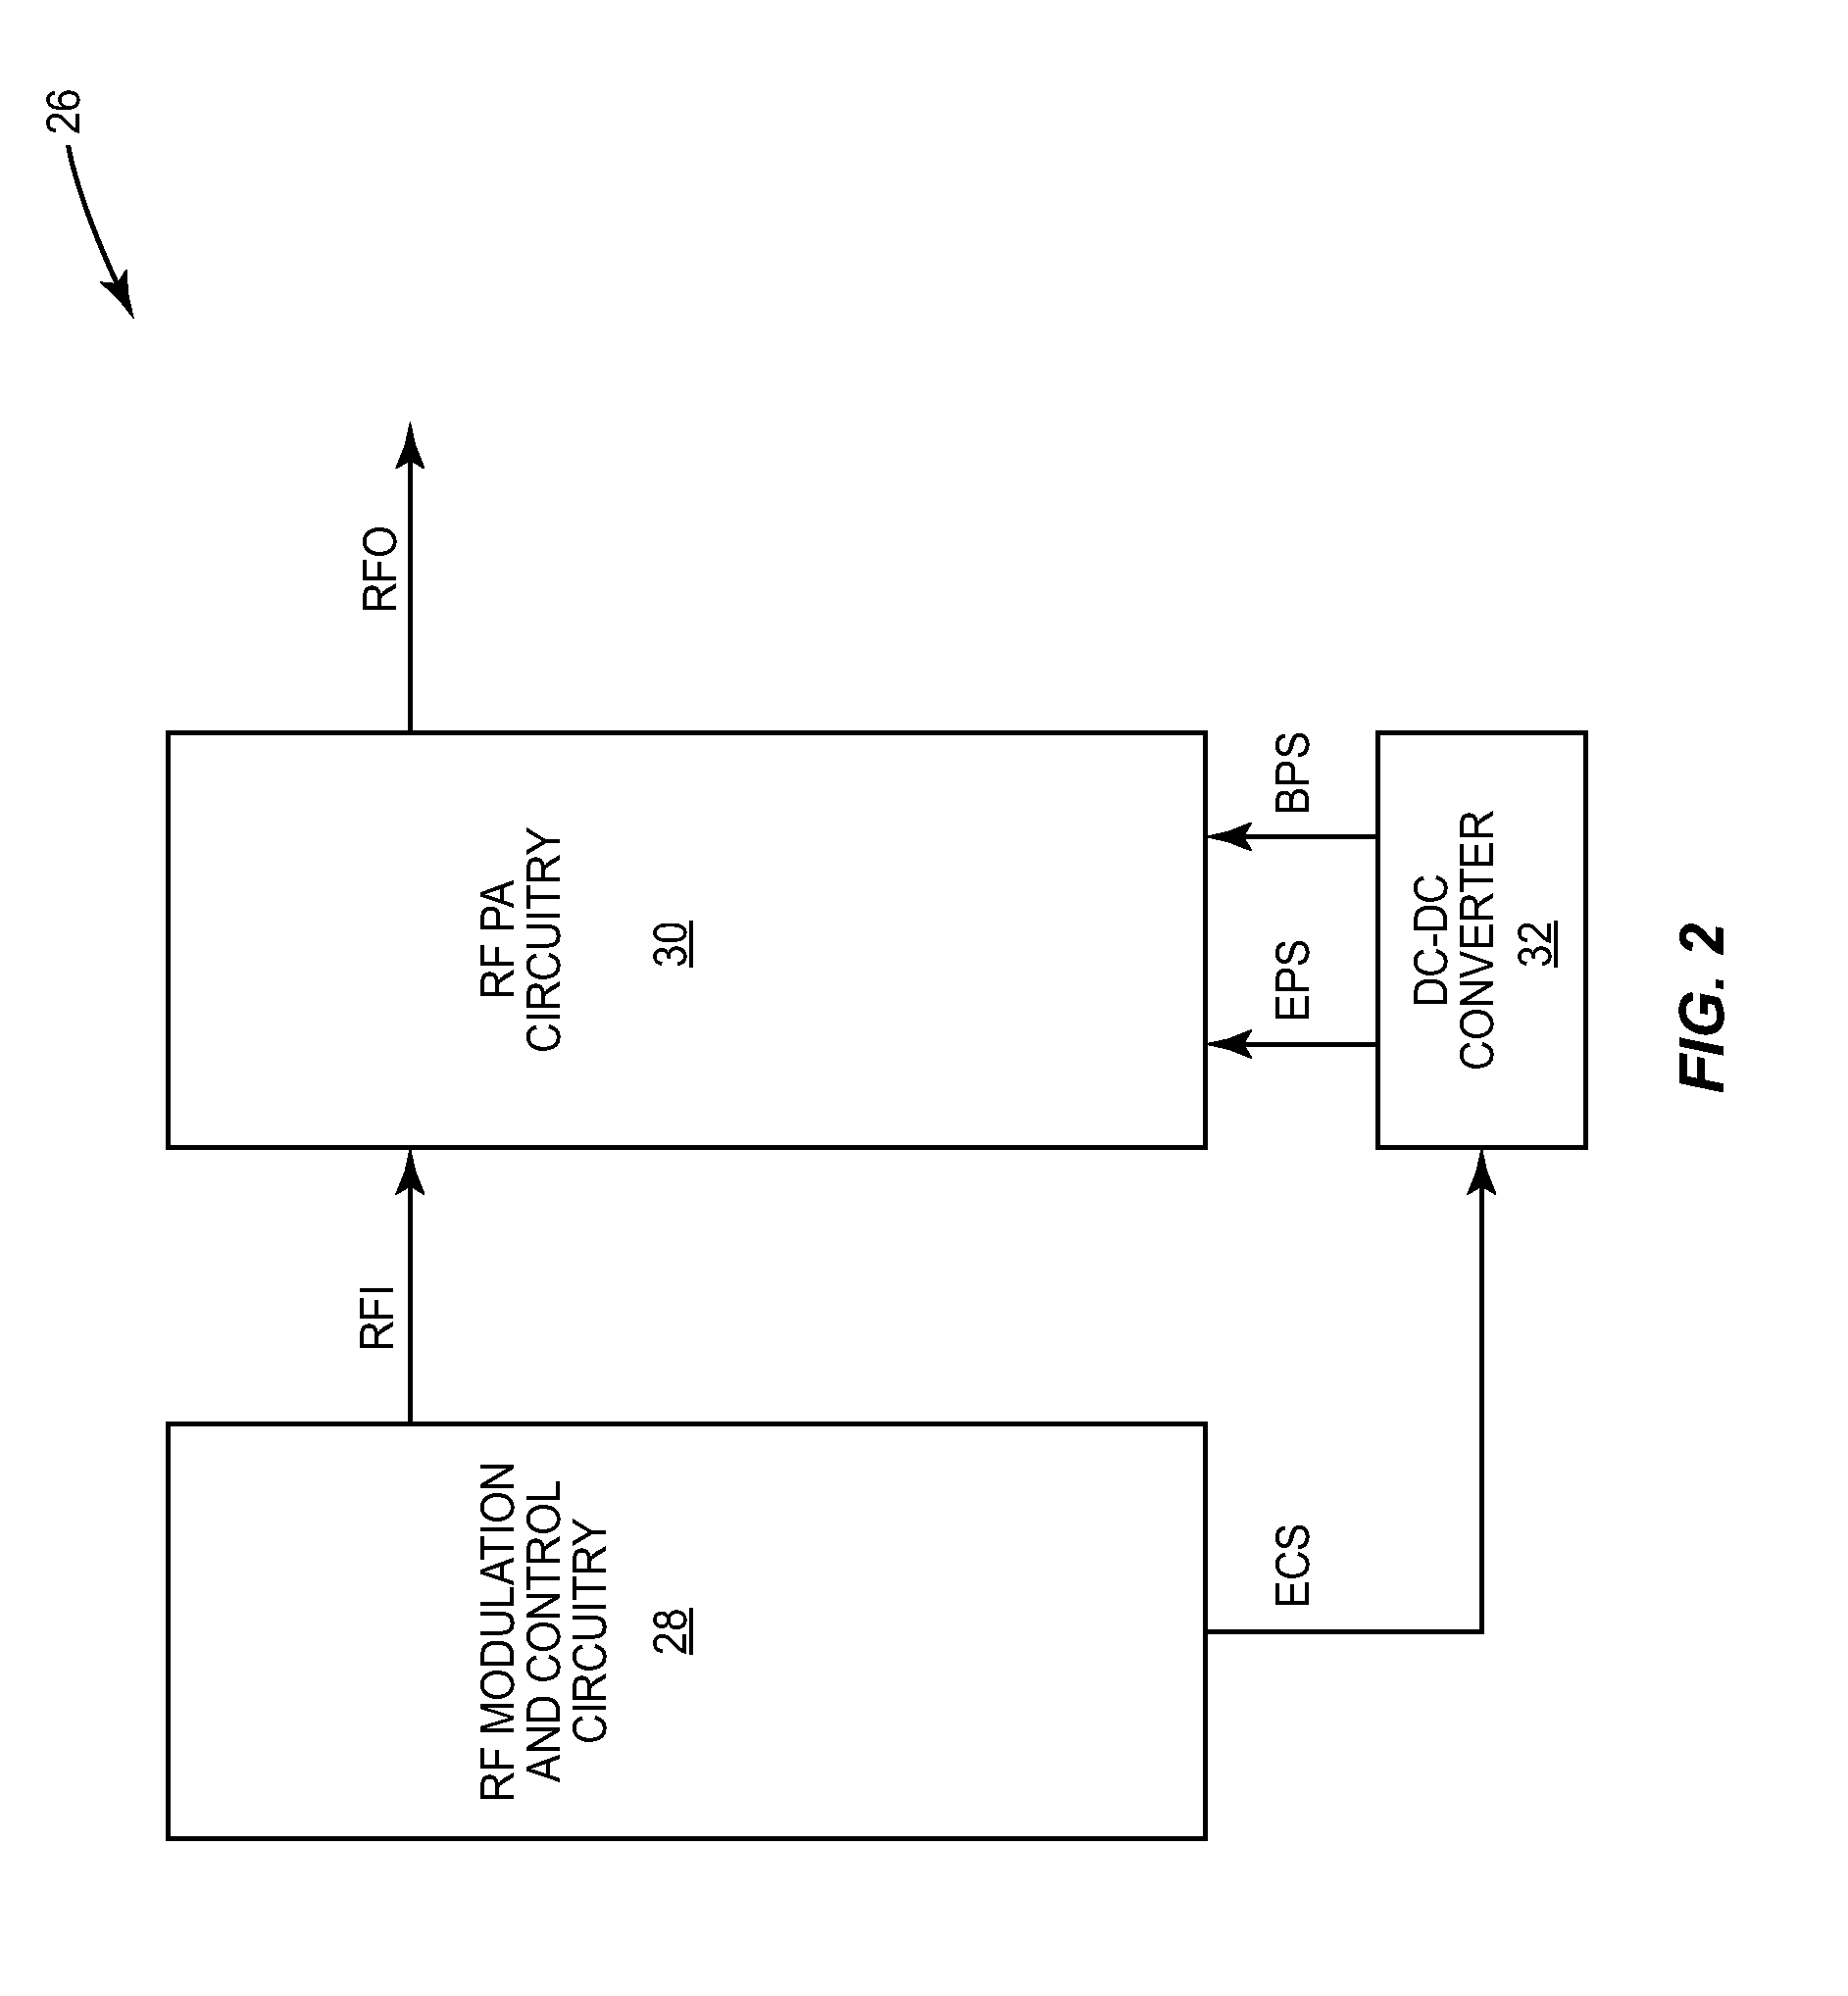 High efficiency path based power amplifier circuitry